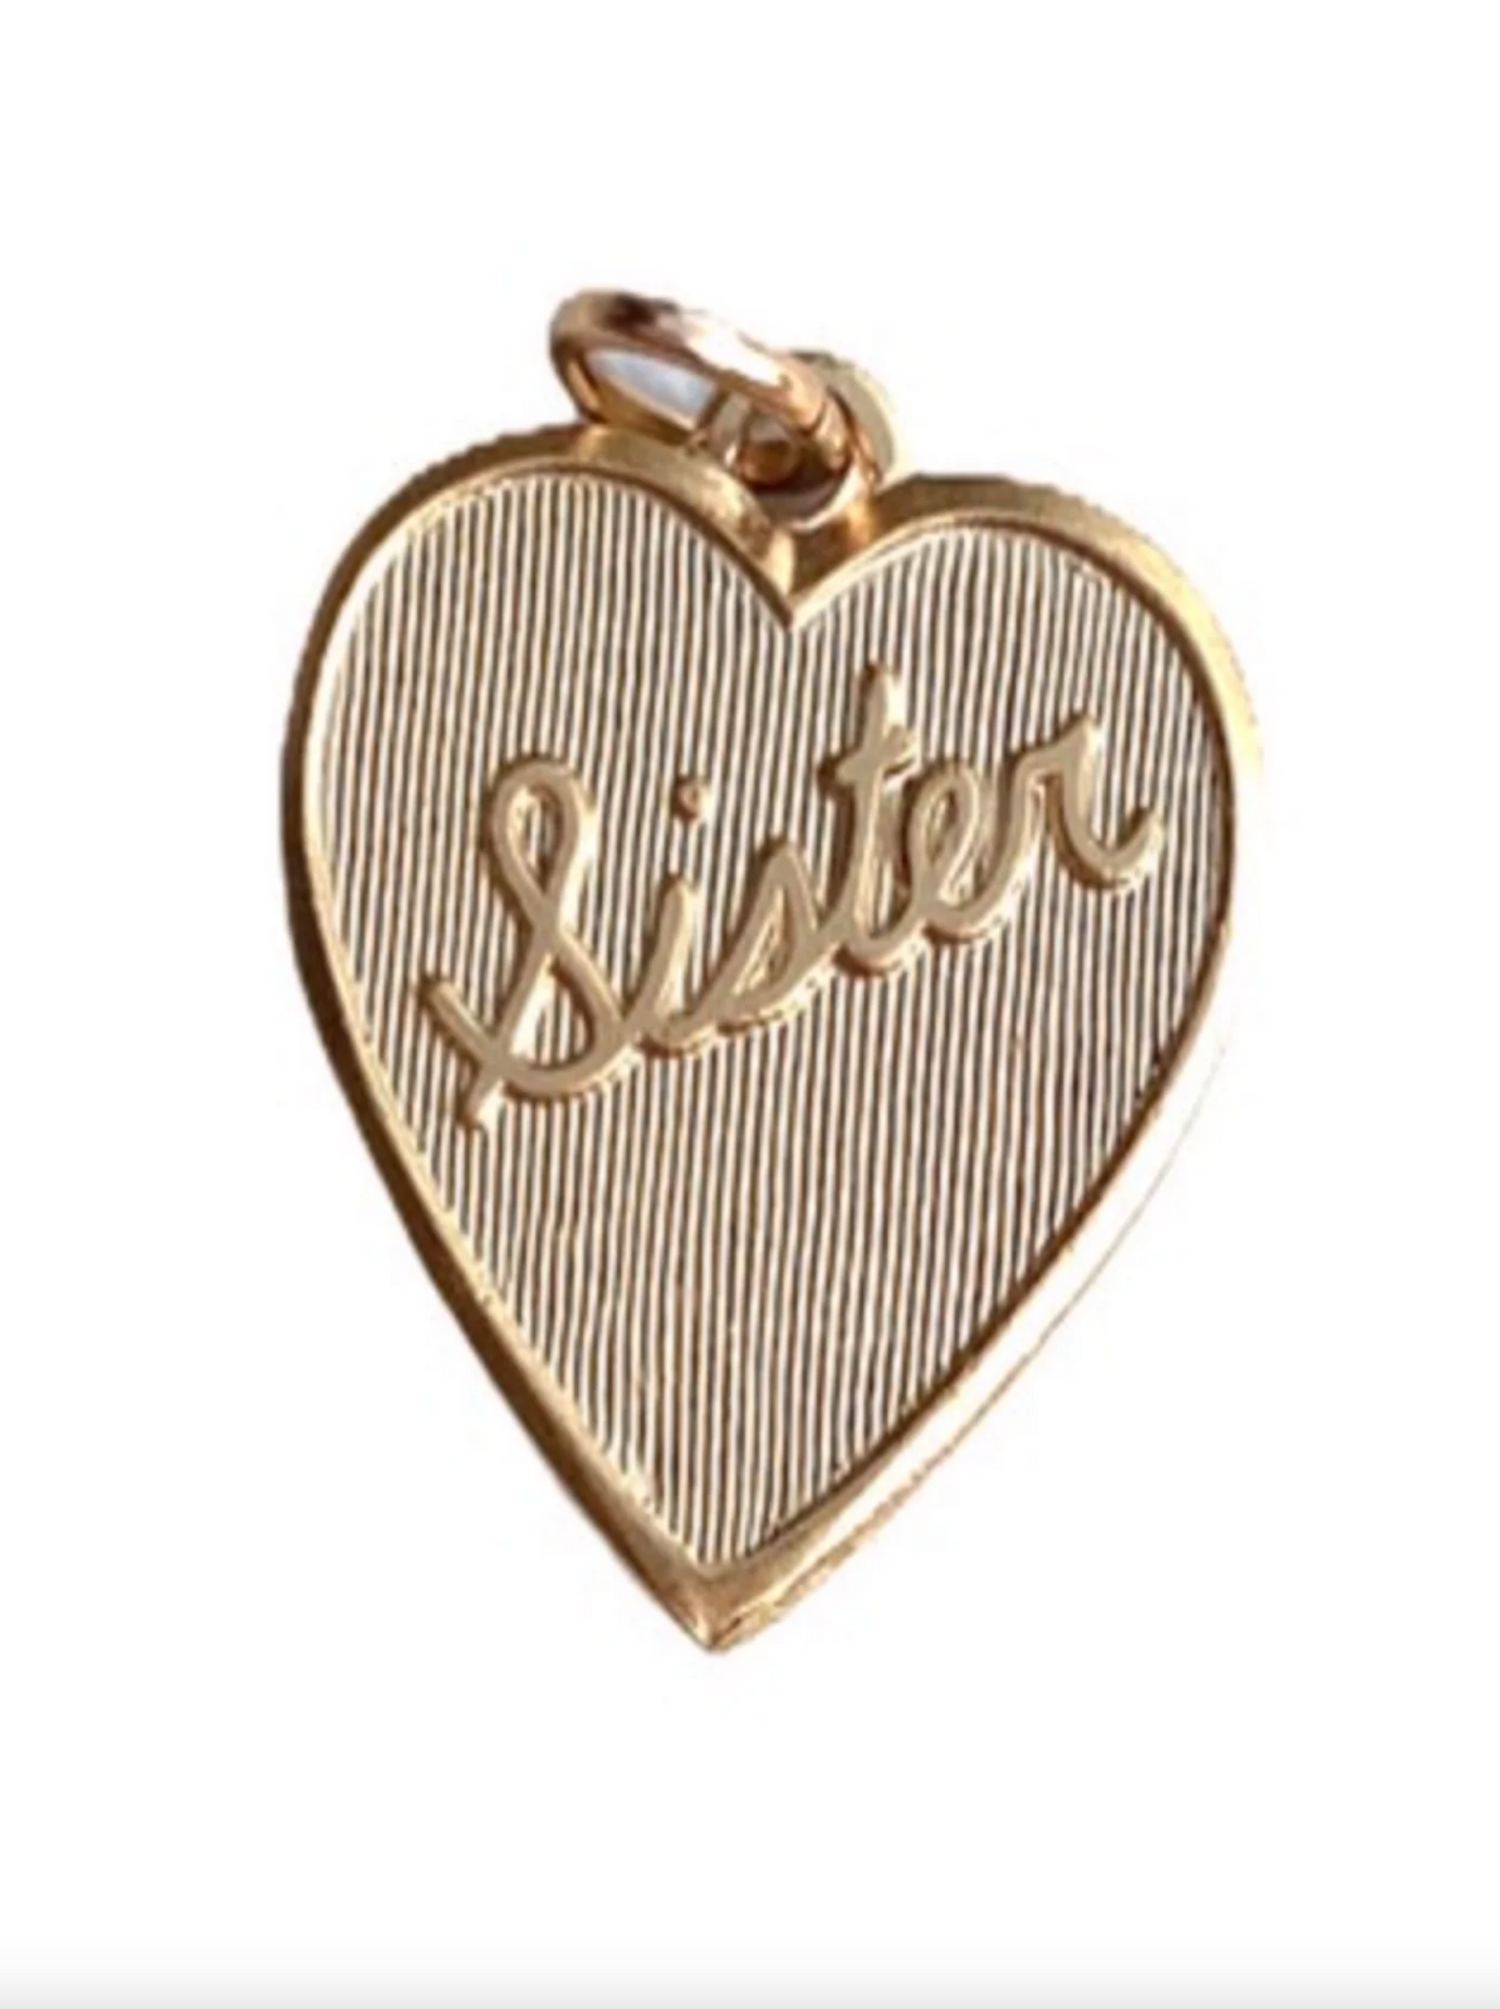 Sister Gold Heart Charm Charm in  at Wrapsody